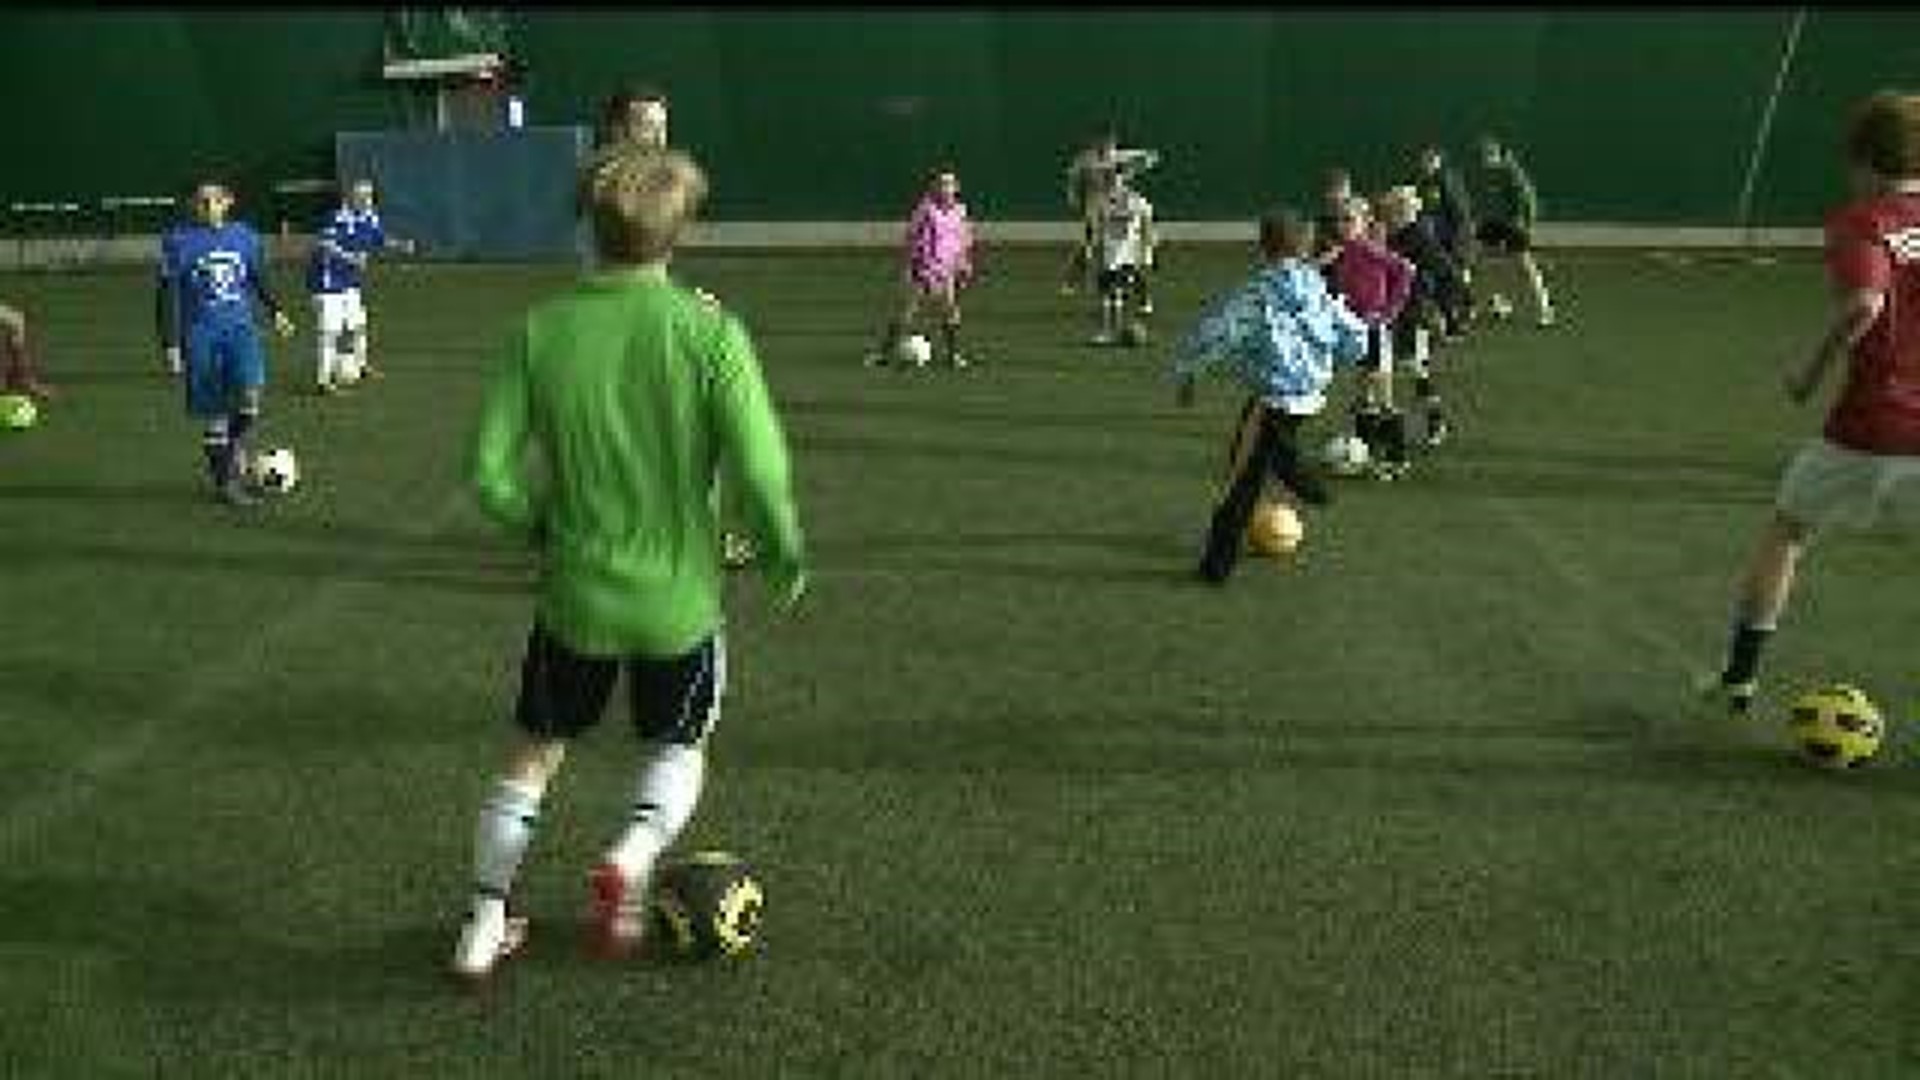 Soccer camp benefit held to help coach